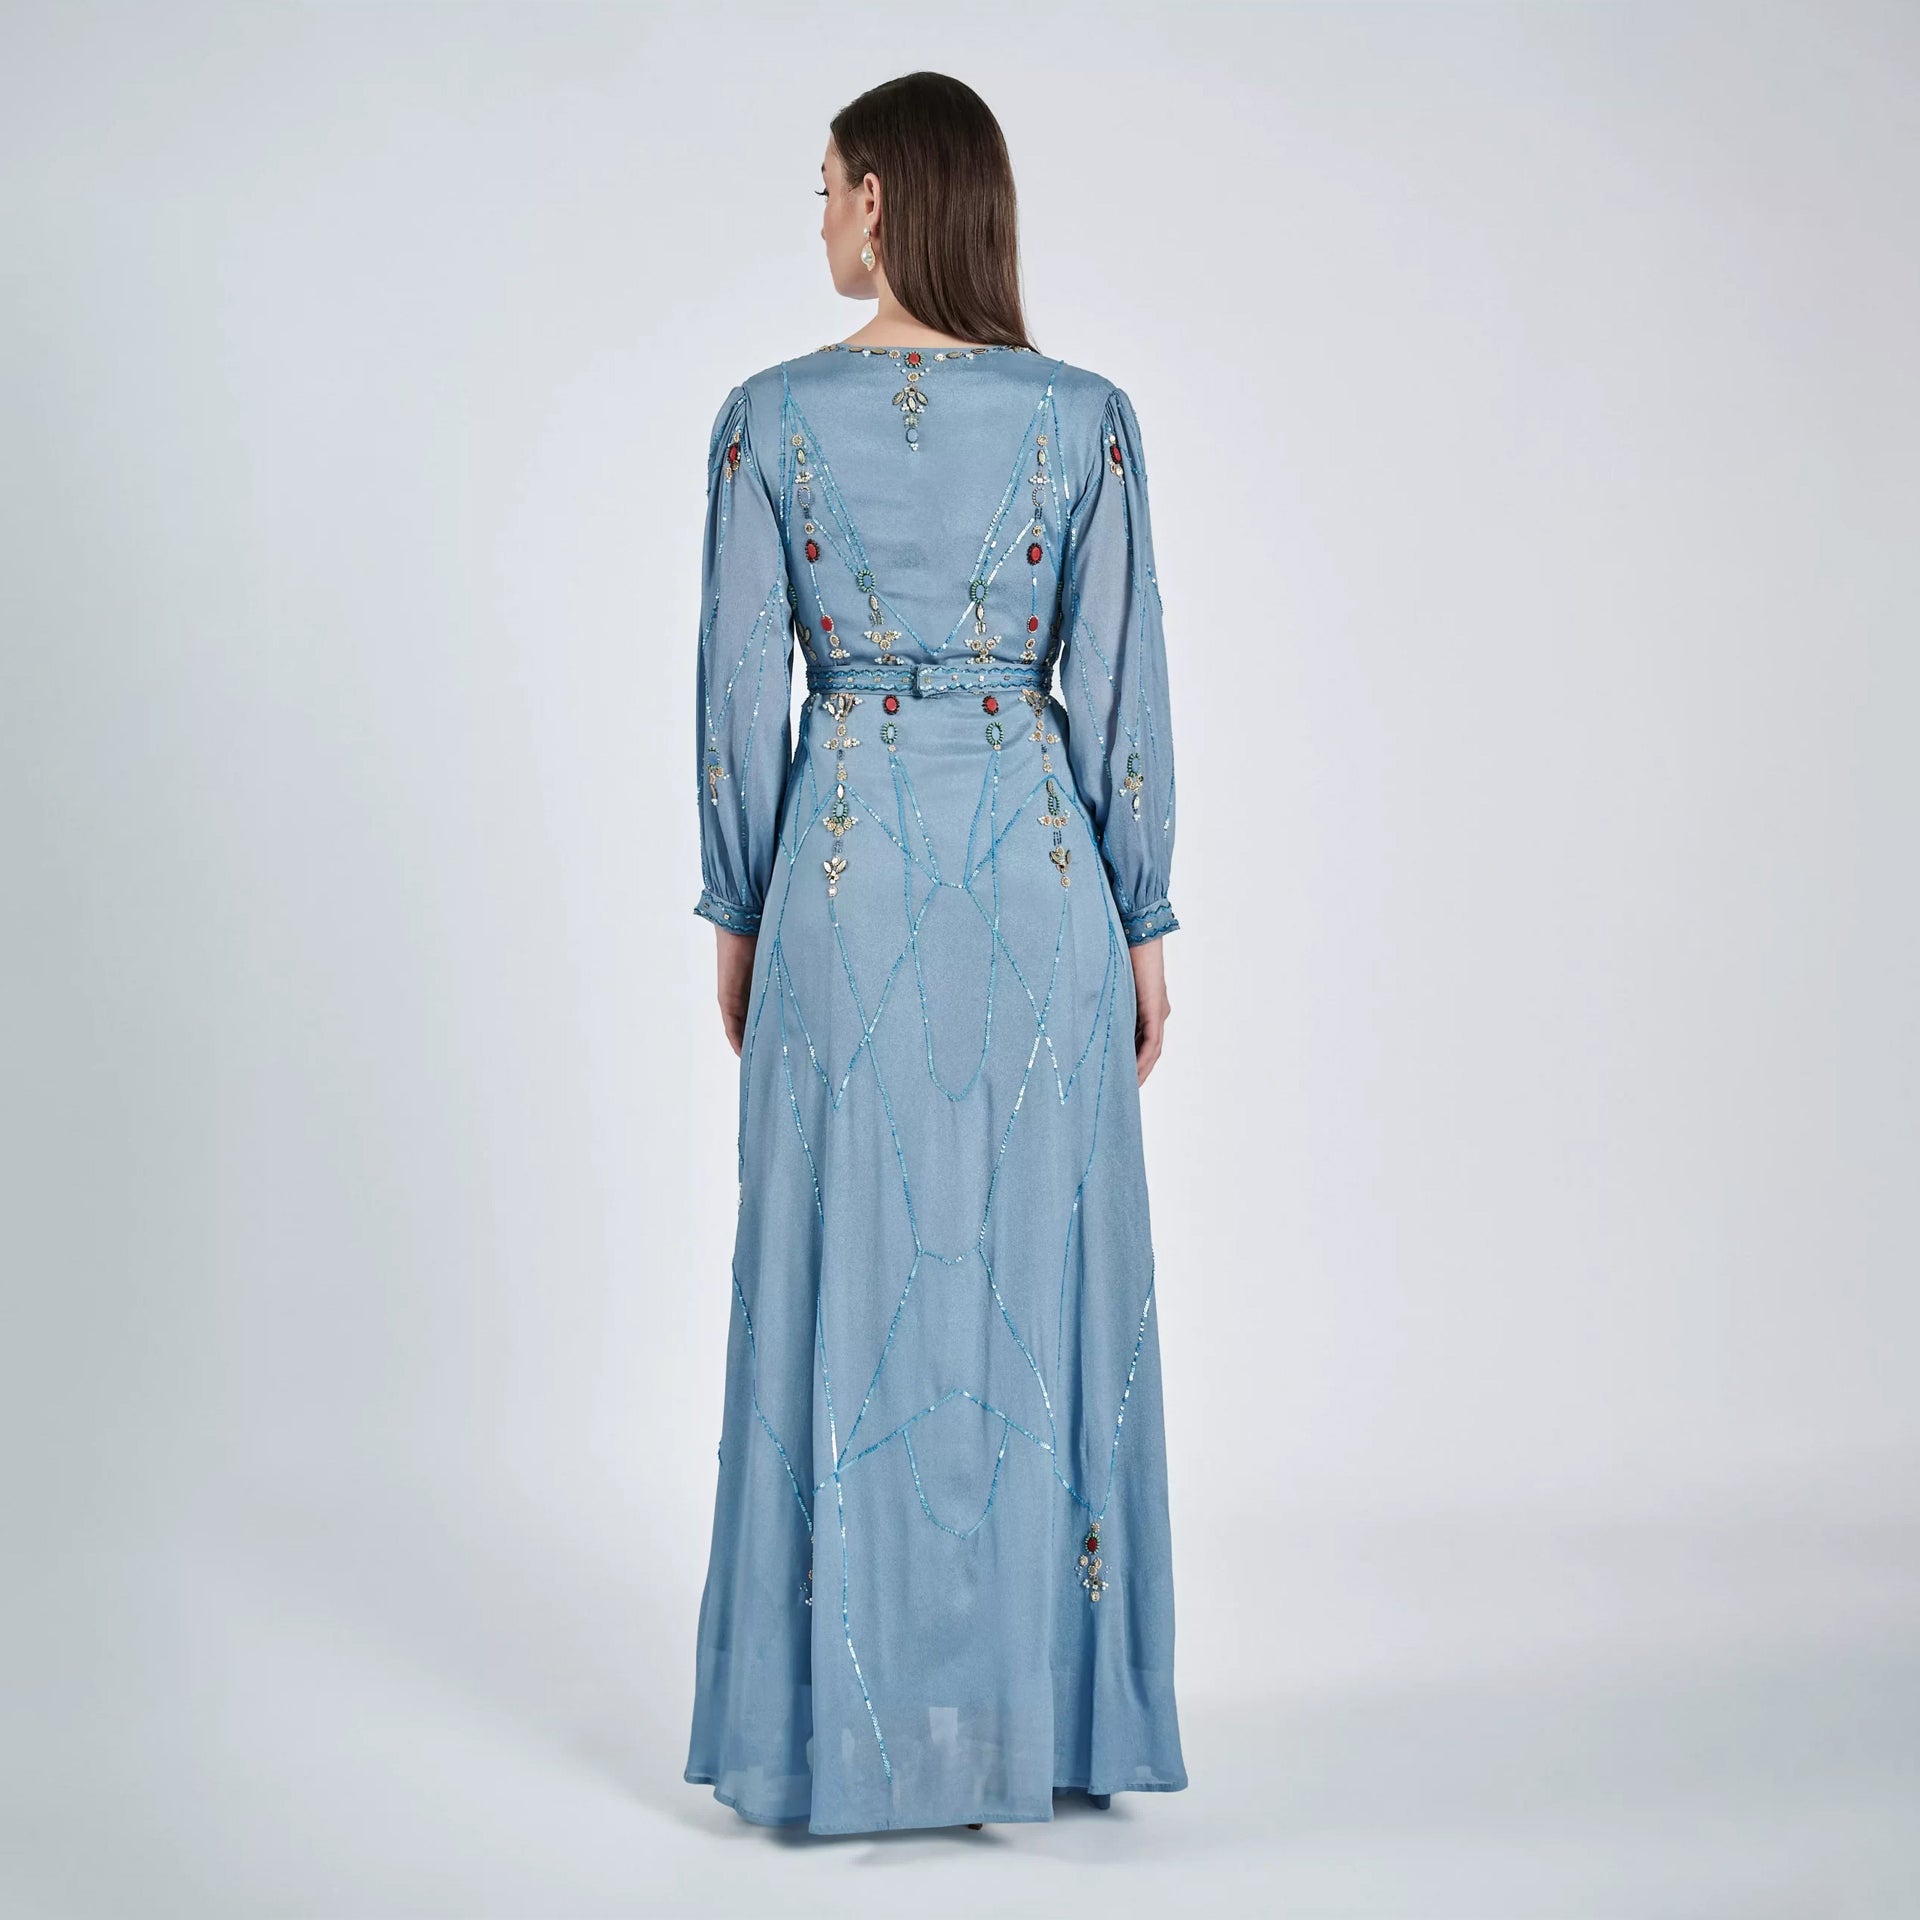 Sky Blue Crepe Dalin Dress with Long Sleeves